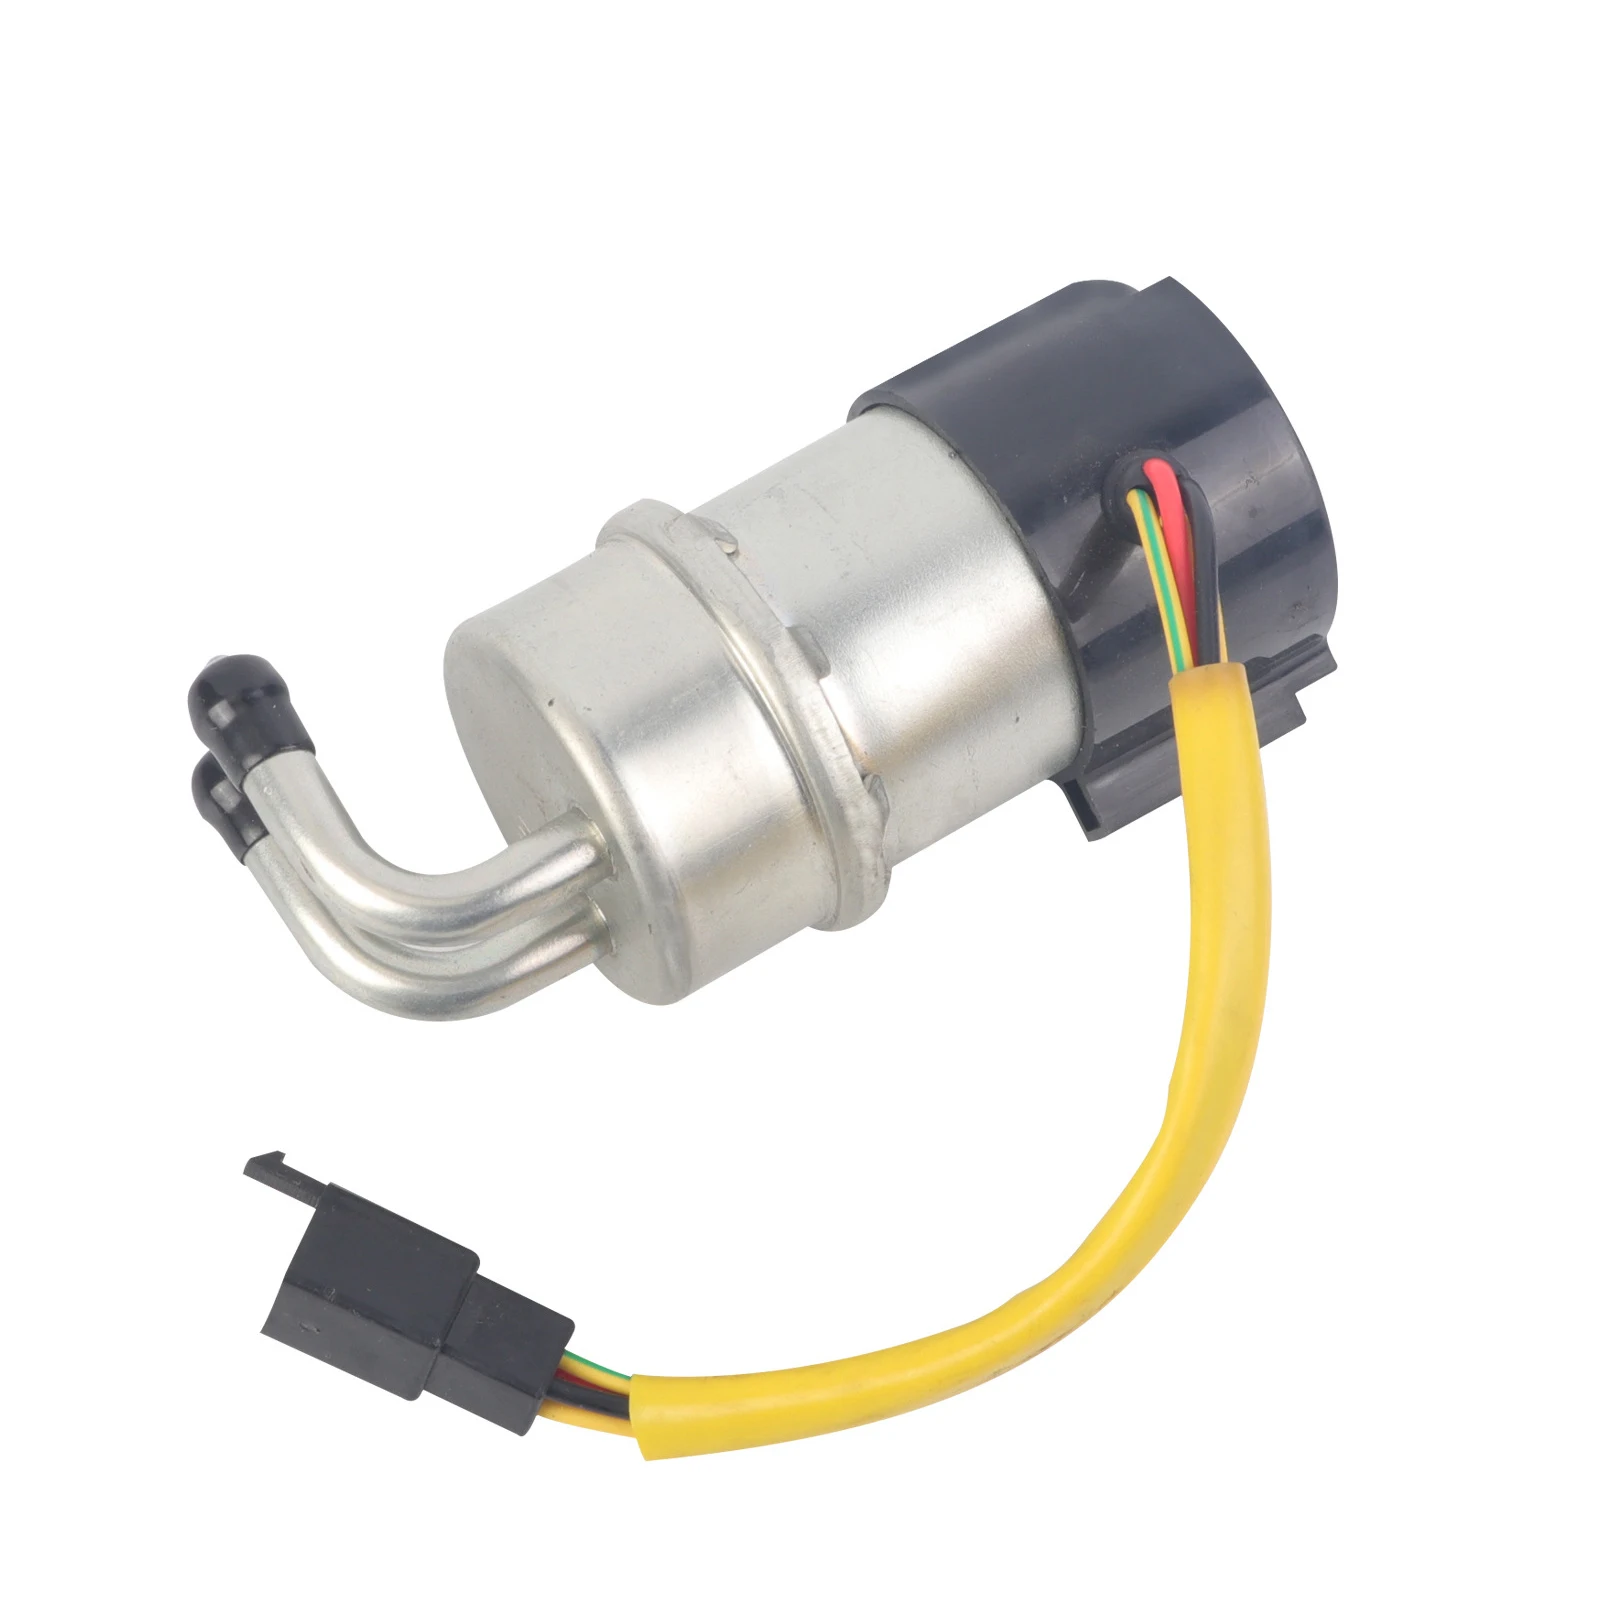 

Motorcycle Fuel Pump Assembly, Compatible with Su-zuki VS700 VS750 Intruder 1986-2009, Easy to Install